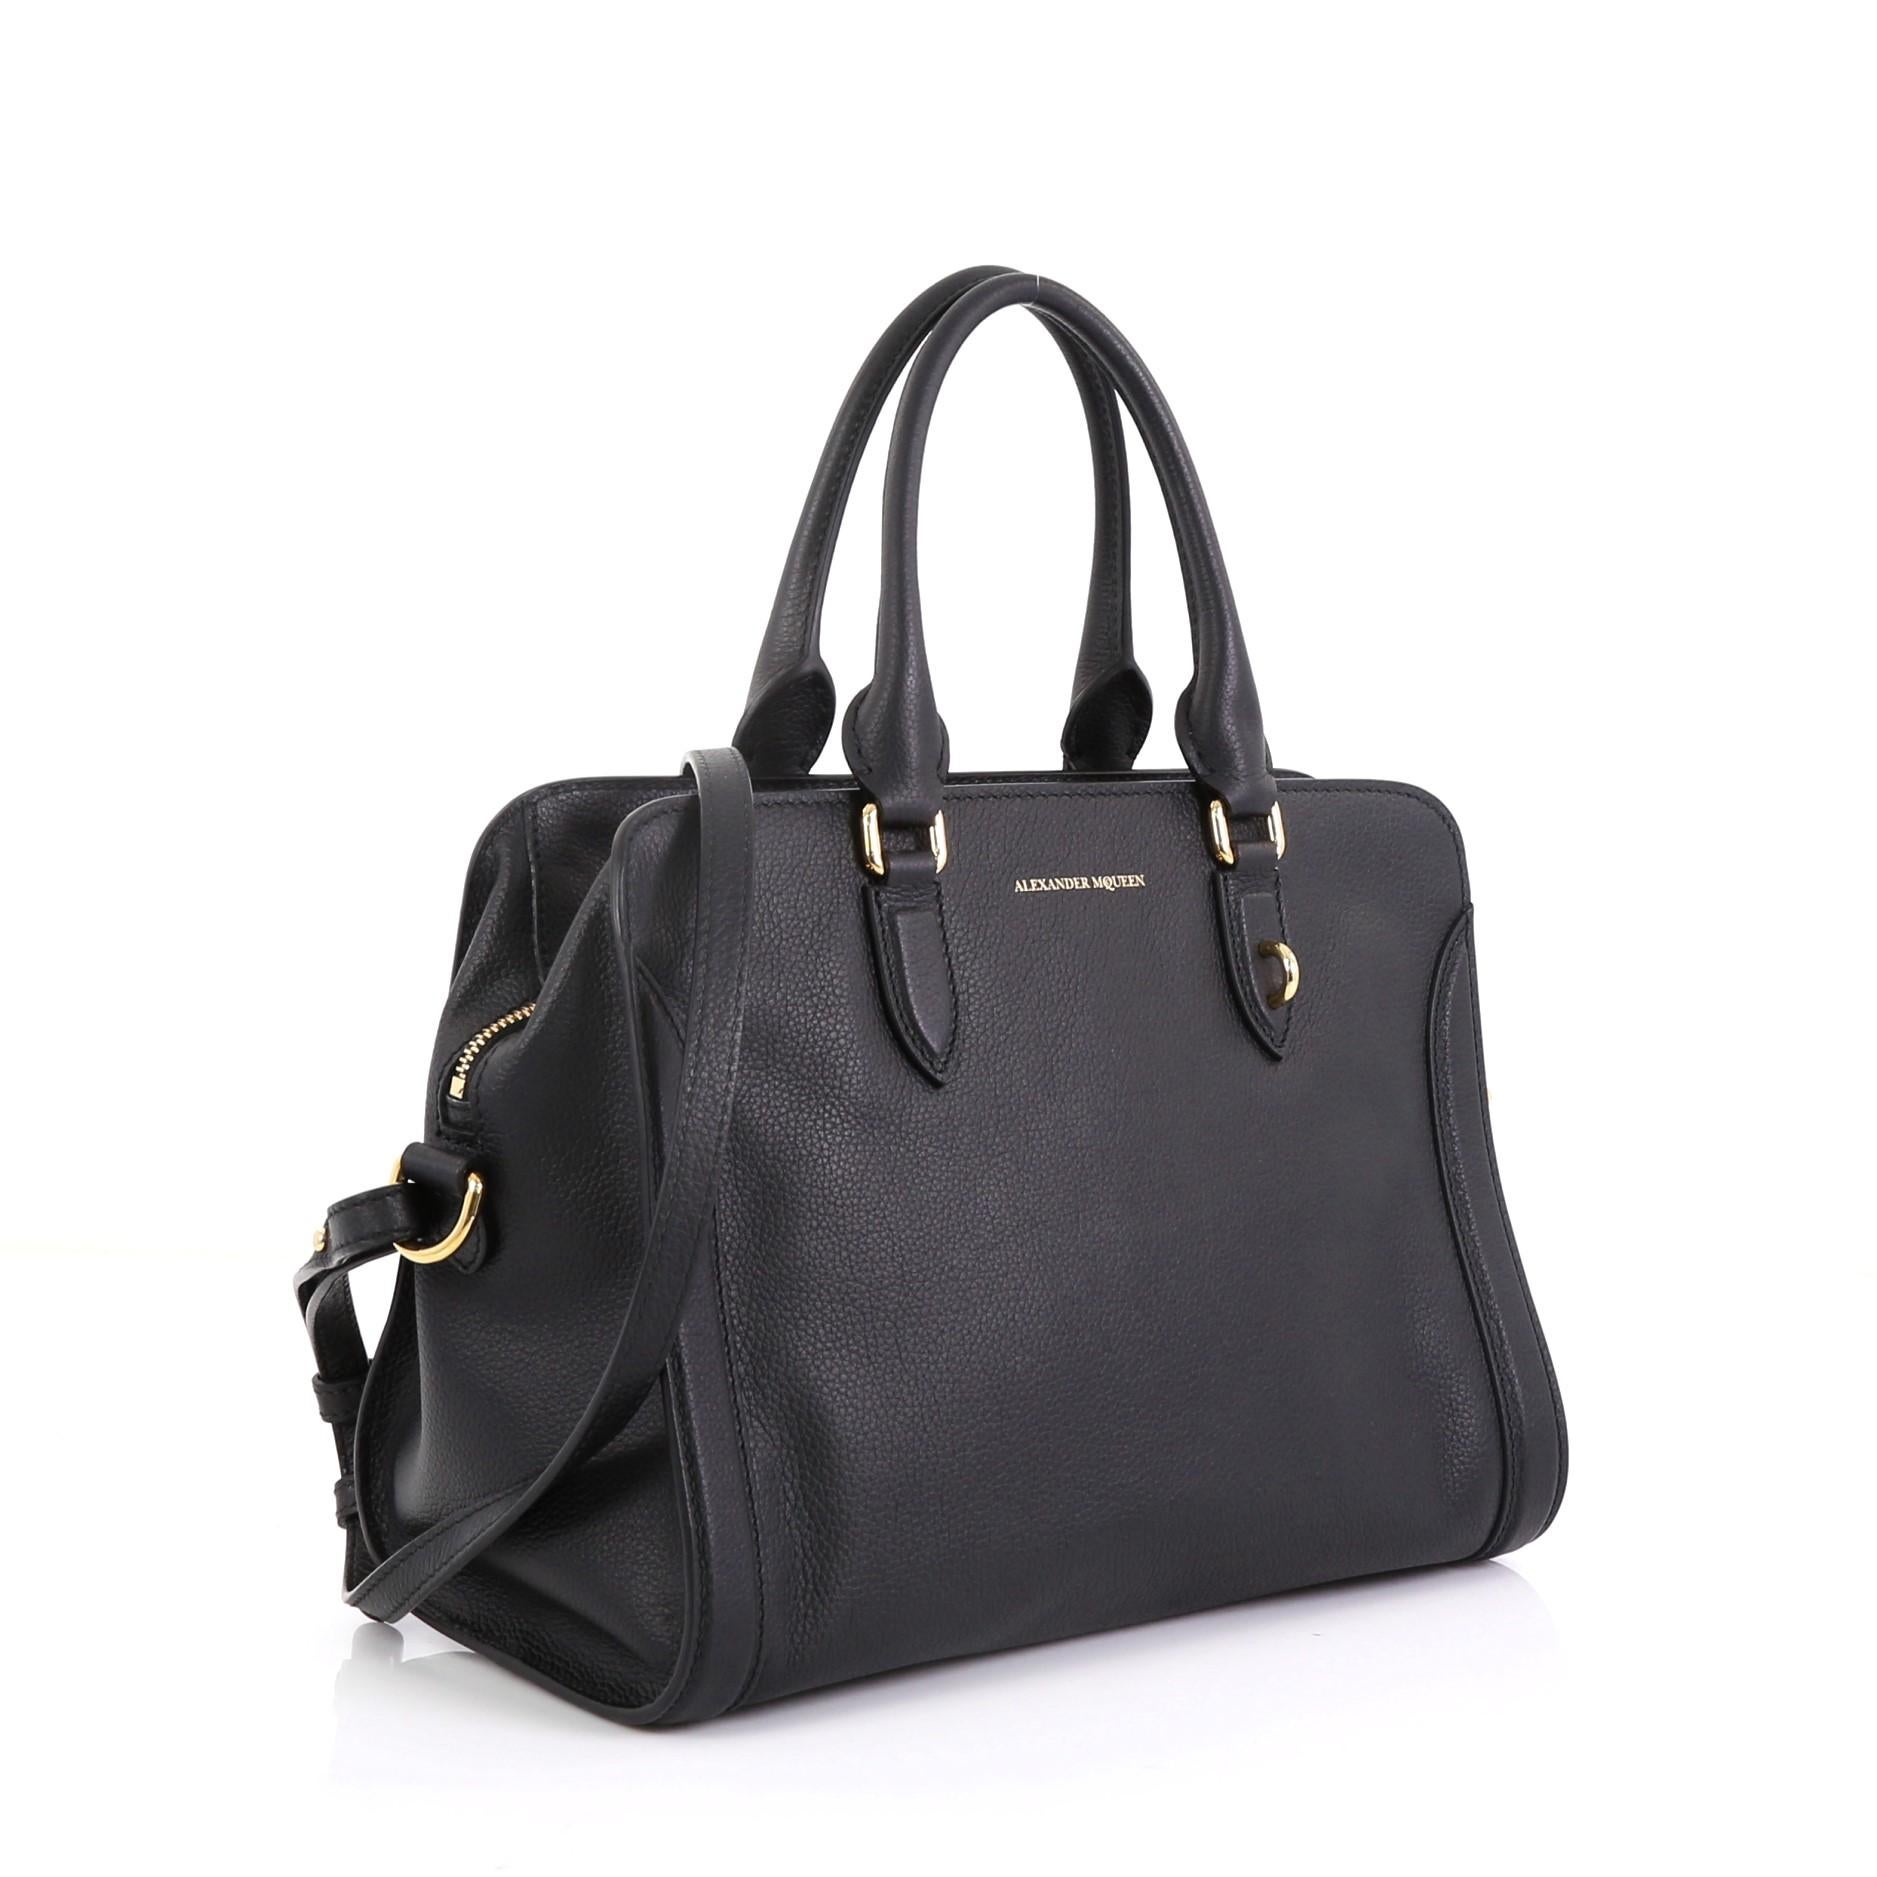 This Alexander McQueen Padlock Zip Around Tote Leather Small, crafted from black leather, features dual rolled handles and gold-tone hardware. Its zip-around closure opens to a black fabric interior with zip and slip pockets. 

Estimated Retail